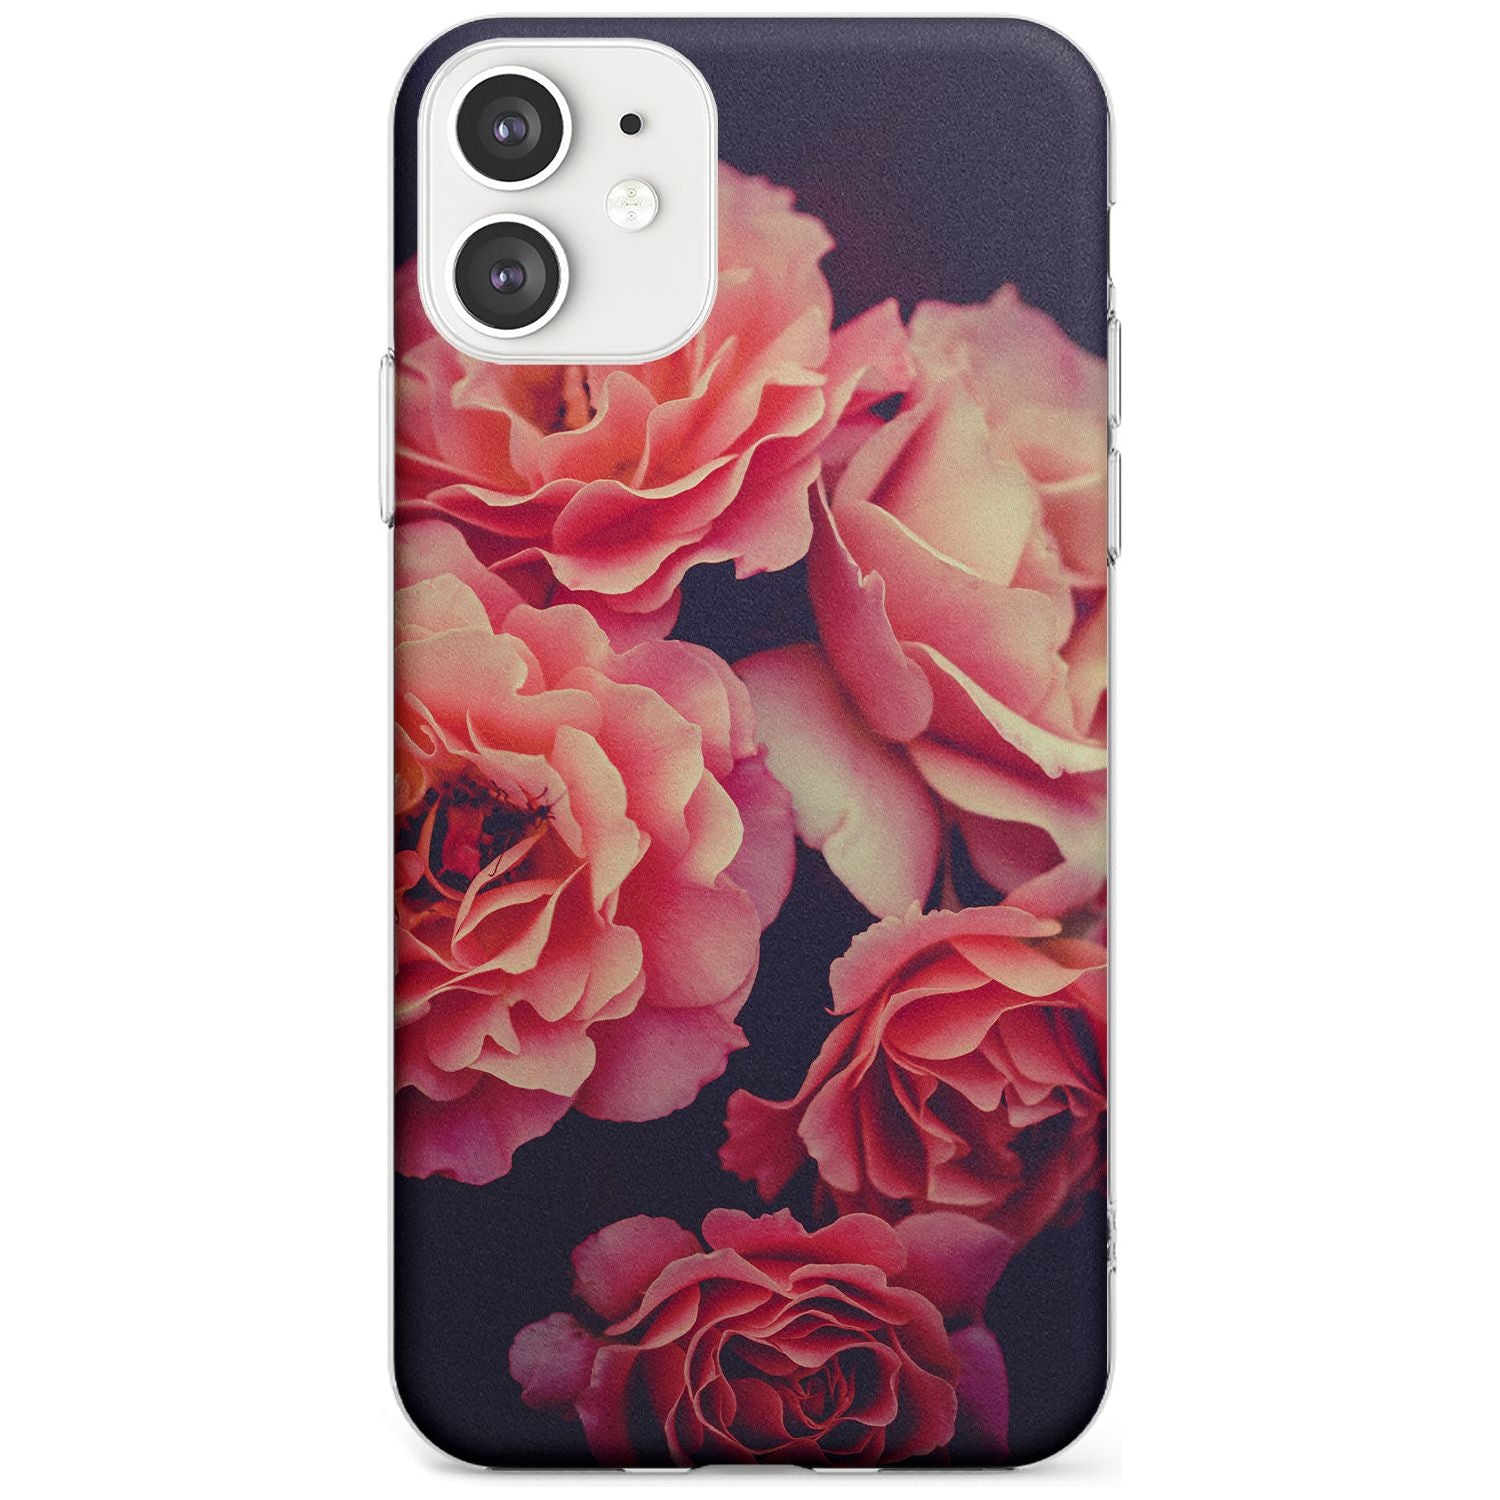 Pink Roses Photograph Slim TPU Phone Case for iPhone 11